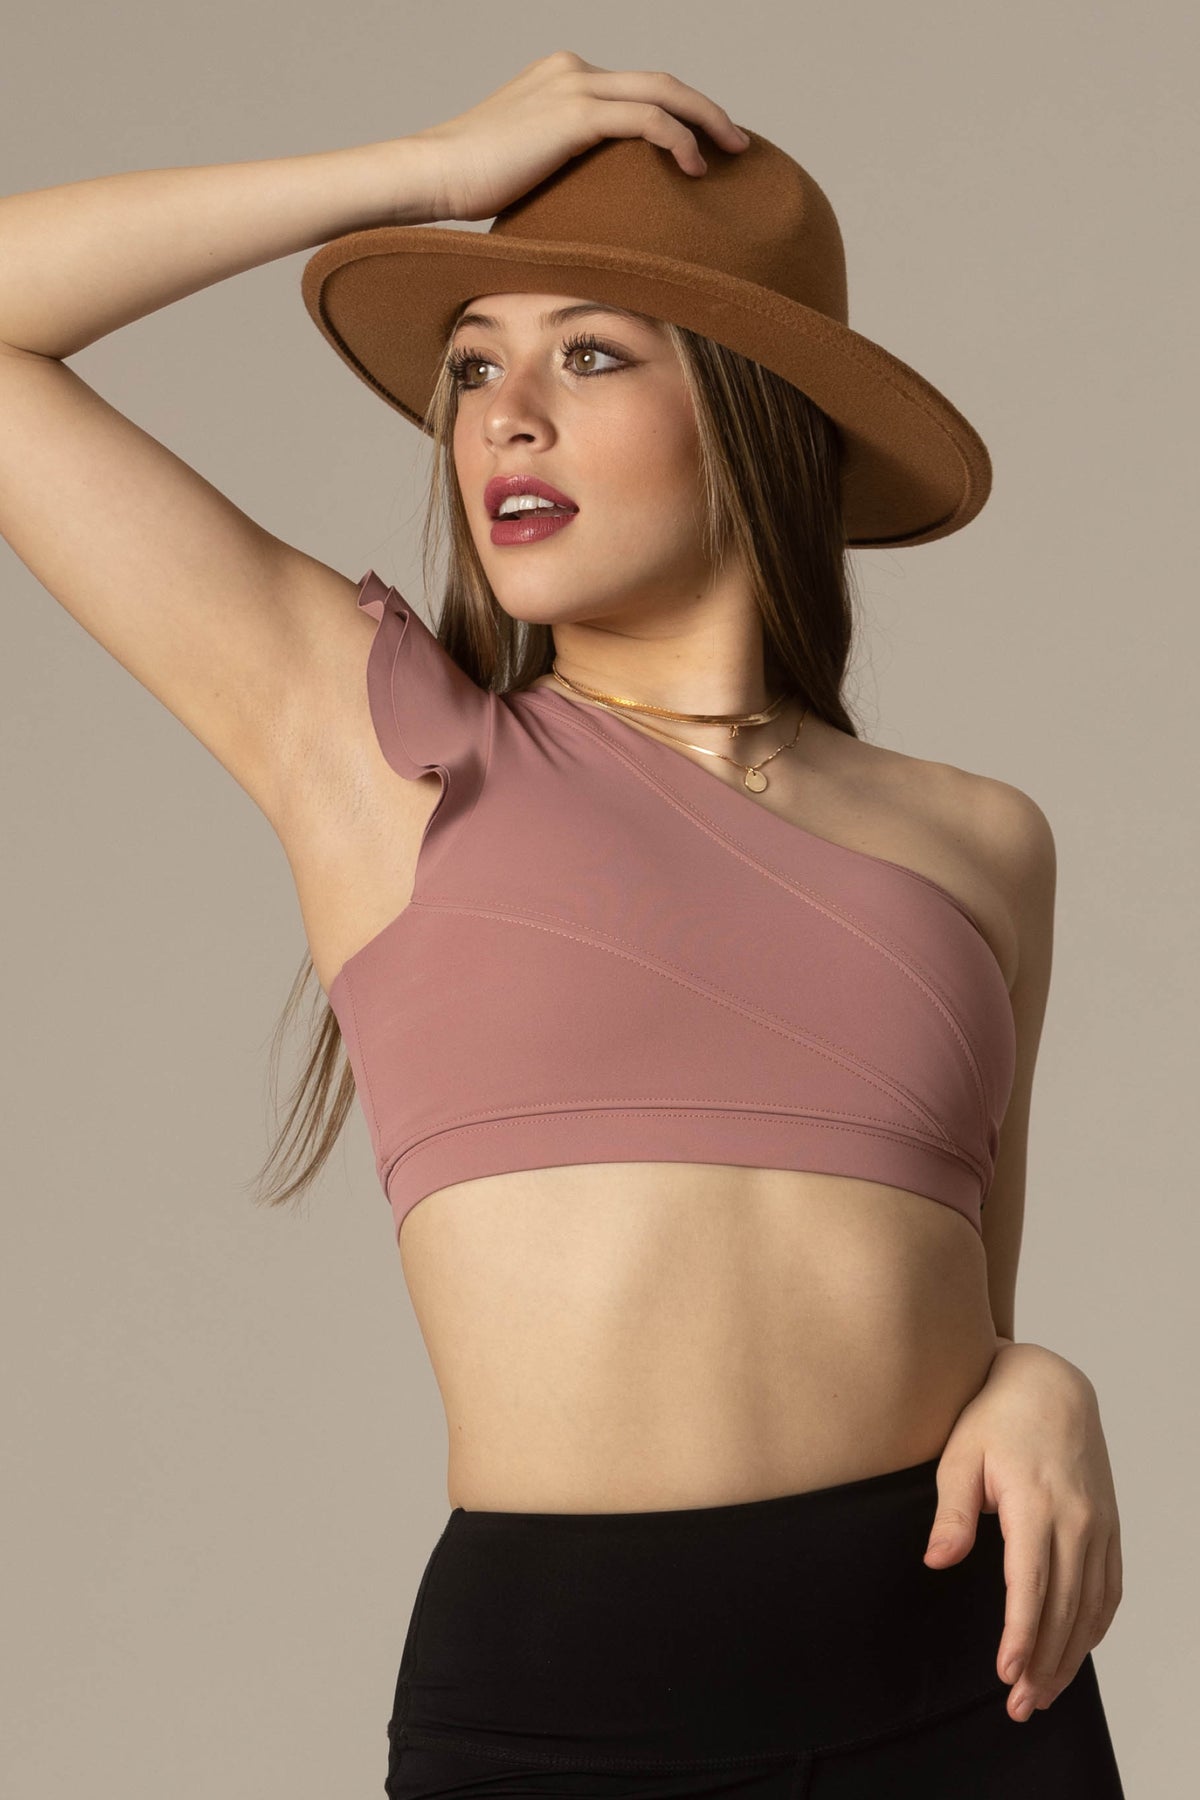 Tiger Friday Online Shop for Southern Belle Crop Top - Champagne Dancewear - Size: Child Small